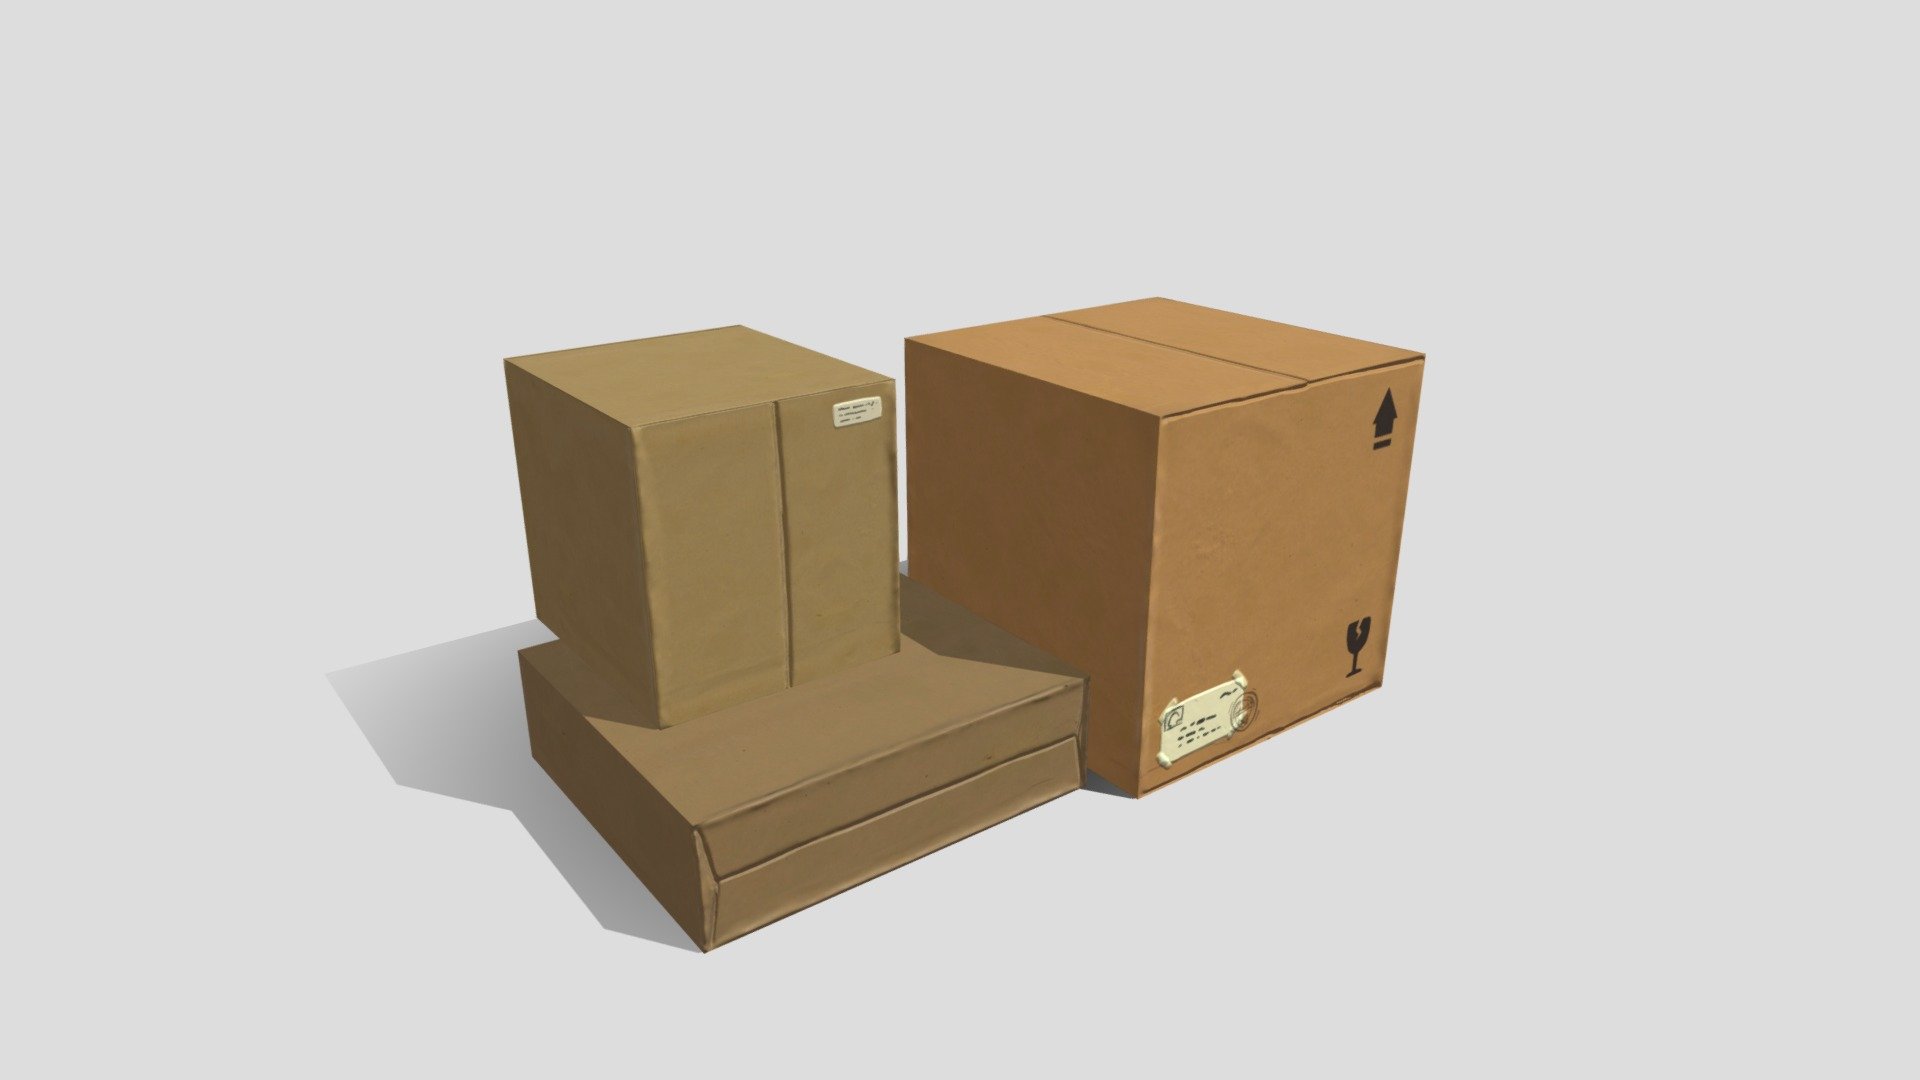 Some toon-style storage boxes.

Contains the model and textures 3d model